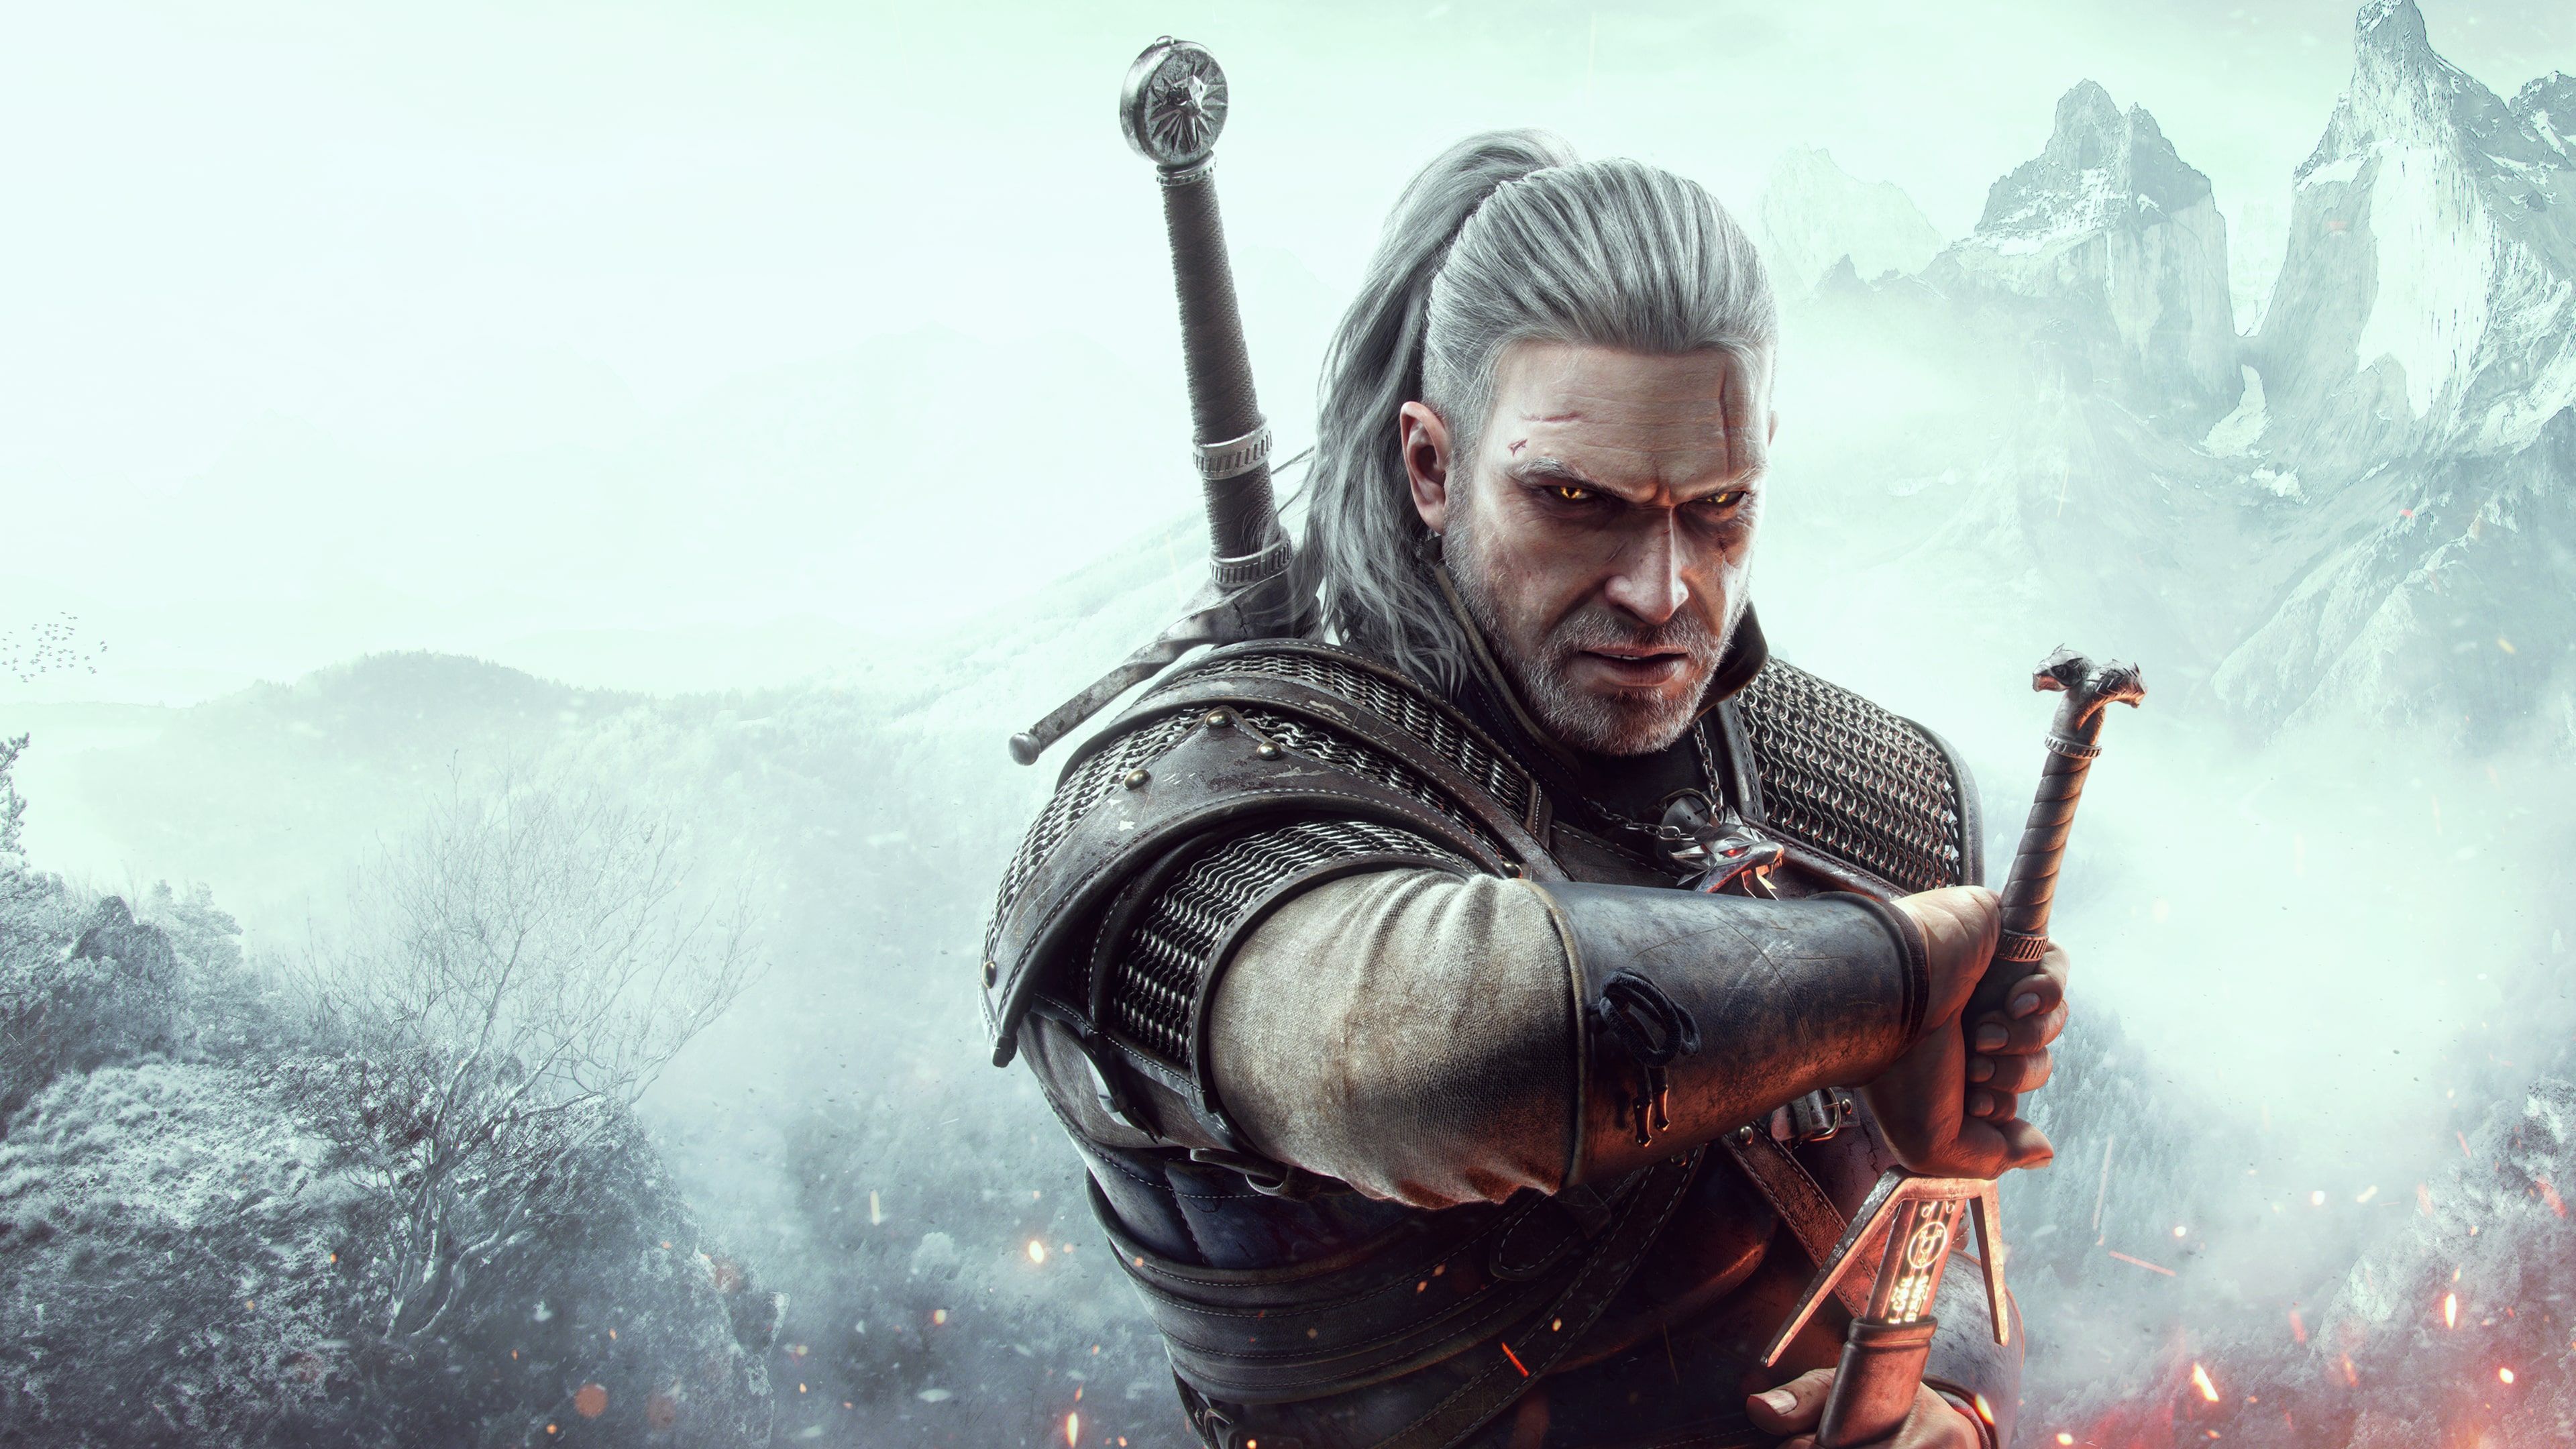 The Witcher 3: Wild Hunt cover image